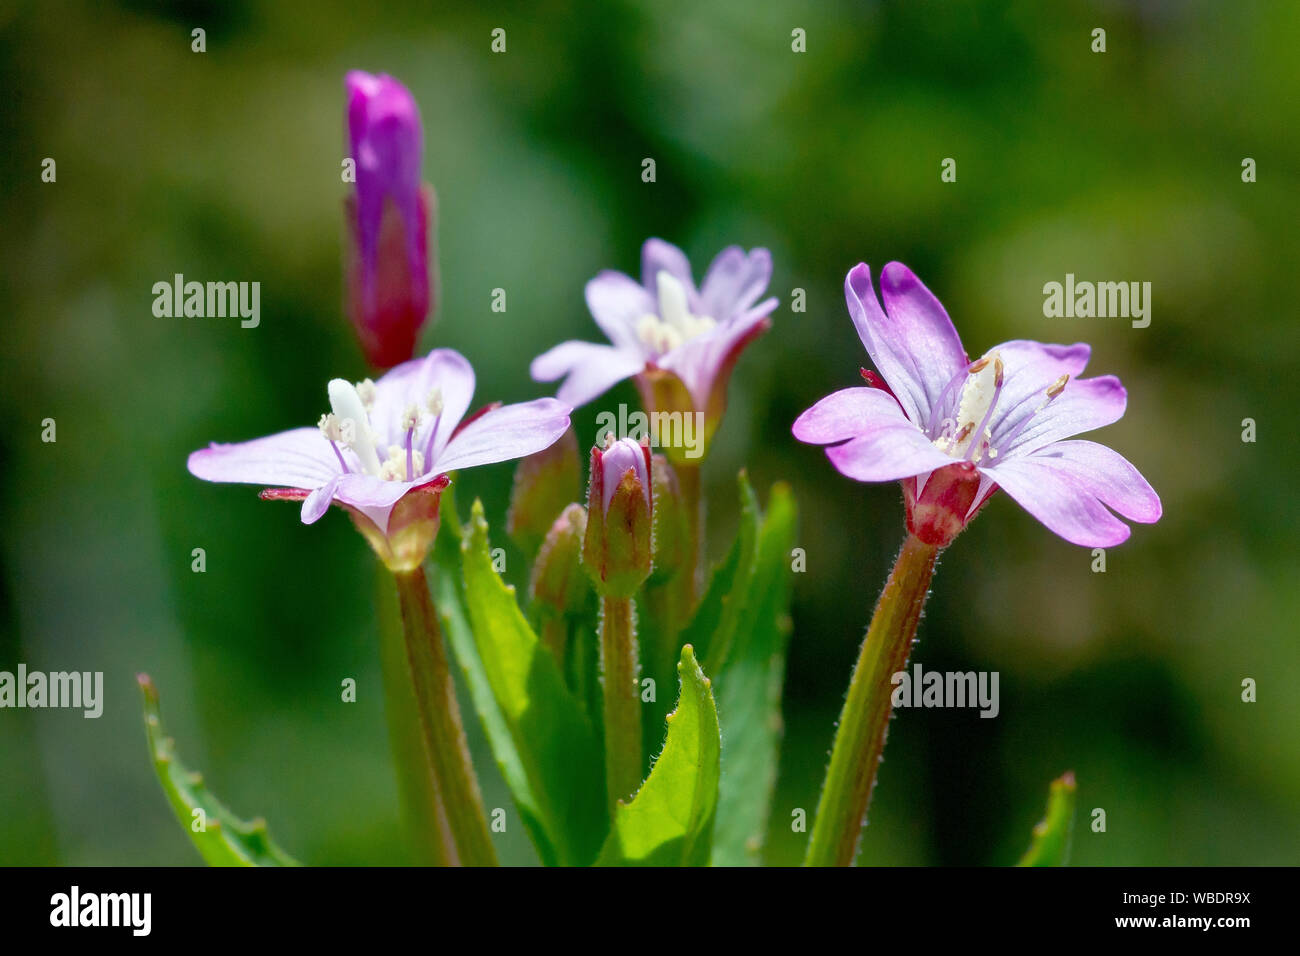 Willowherb, close up of the flowers of one of the many smaller varieties of the plant. This is probably Broad-leaved Willowherb (epilobium montanum). Stock Photo